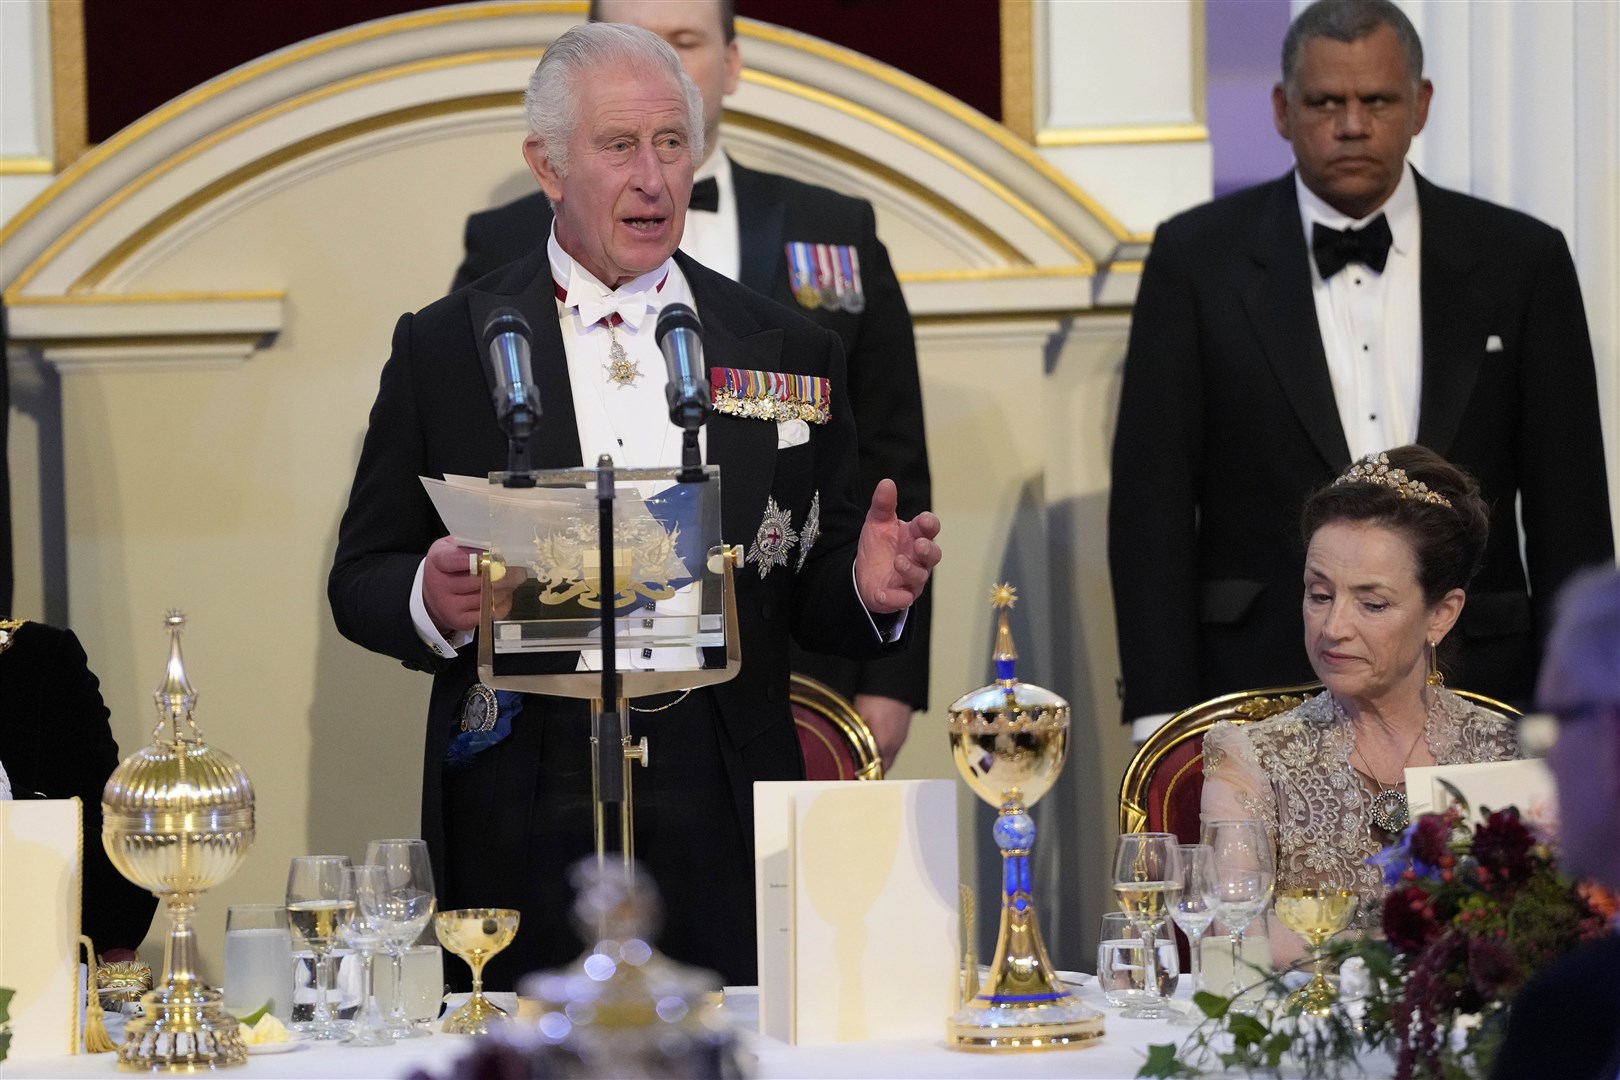 Charles addressing the Mansion House guests. Kirsty Wigglesworth/PA